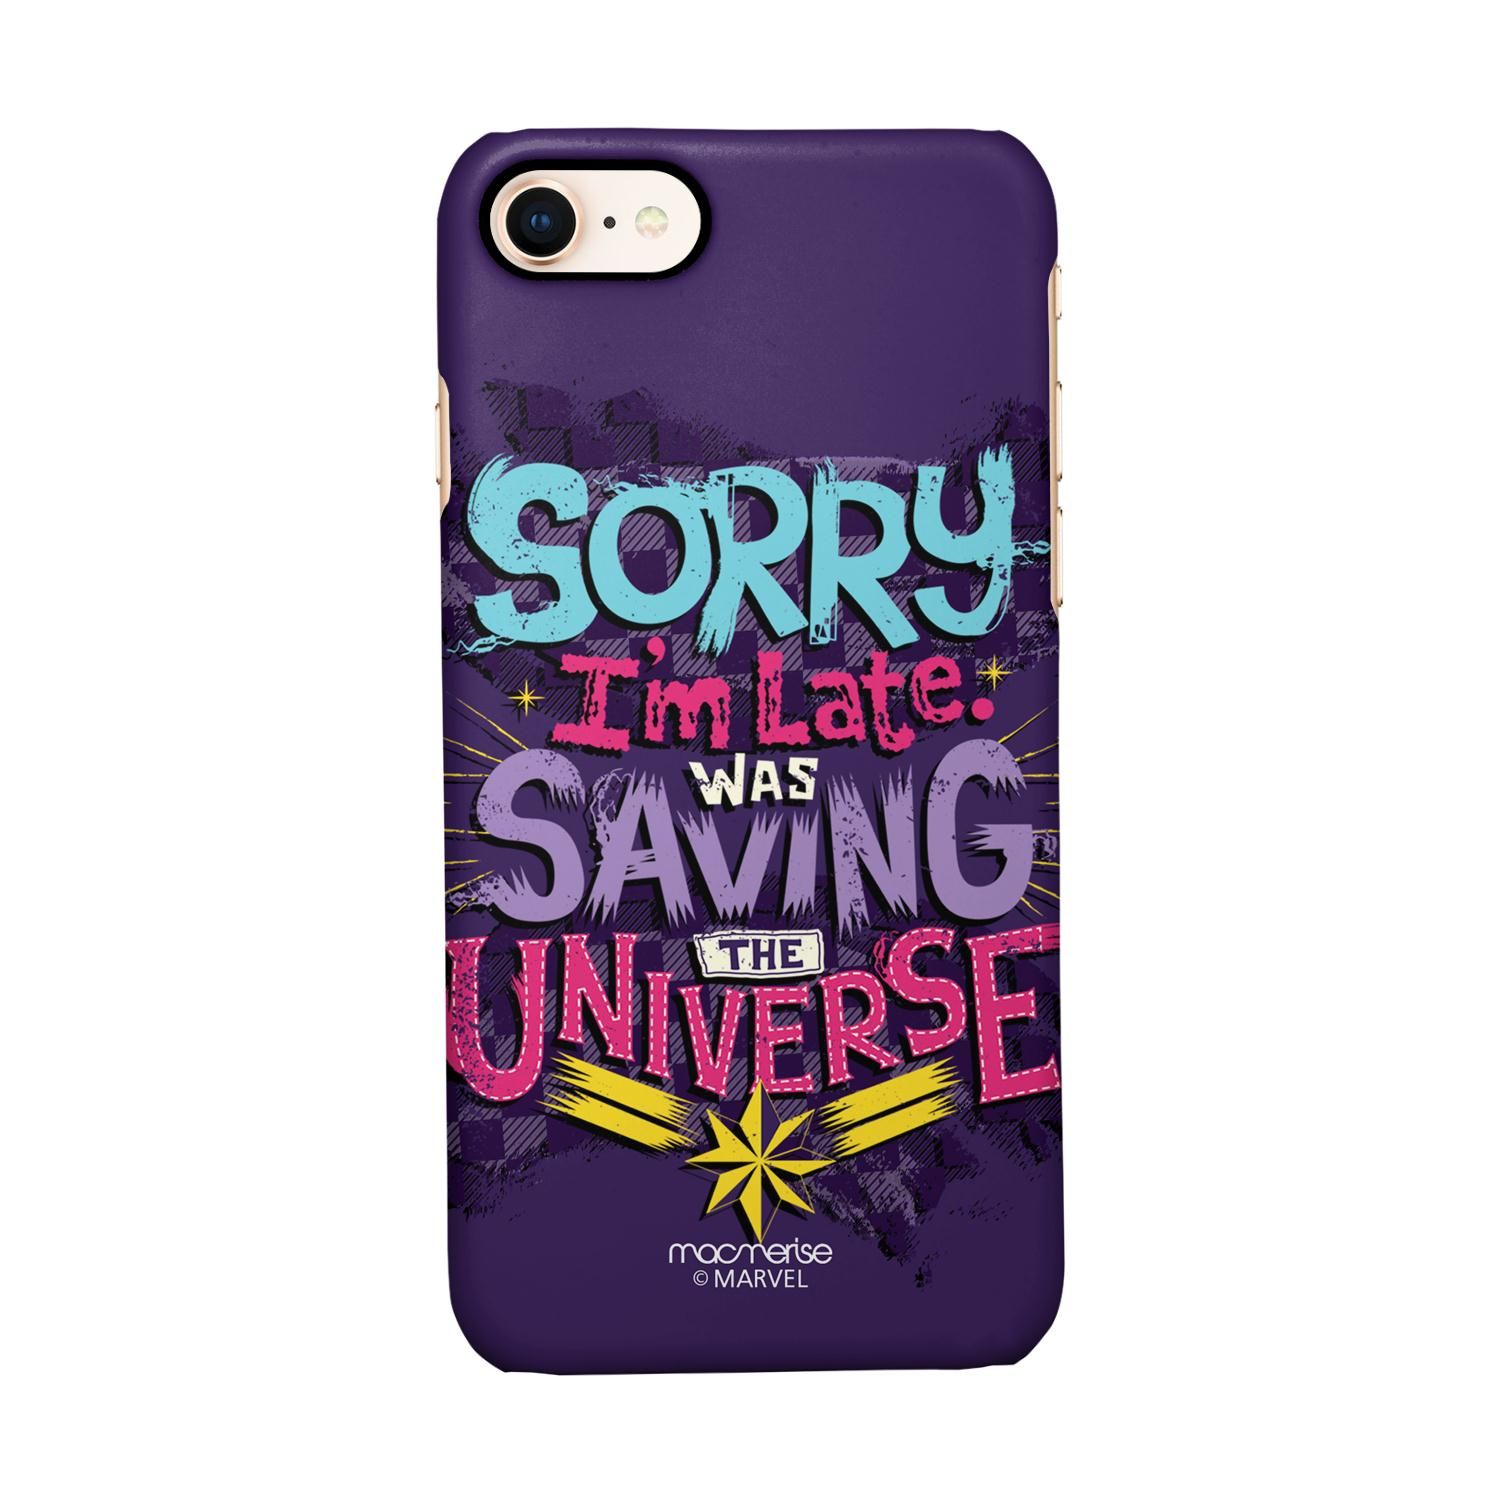 Buy Saving The Universe - Sleek Phone Case for iPhone 8 Online